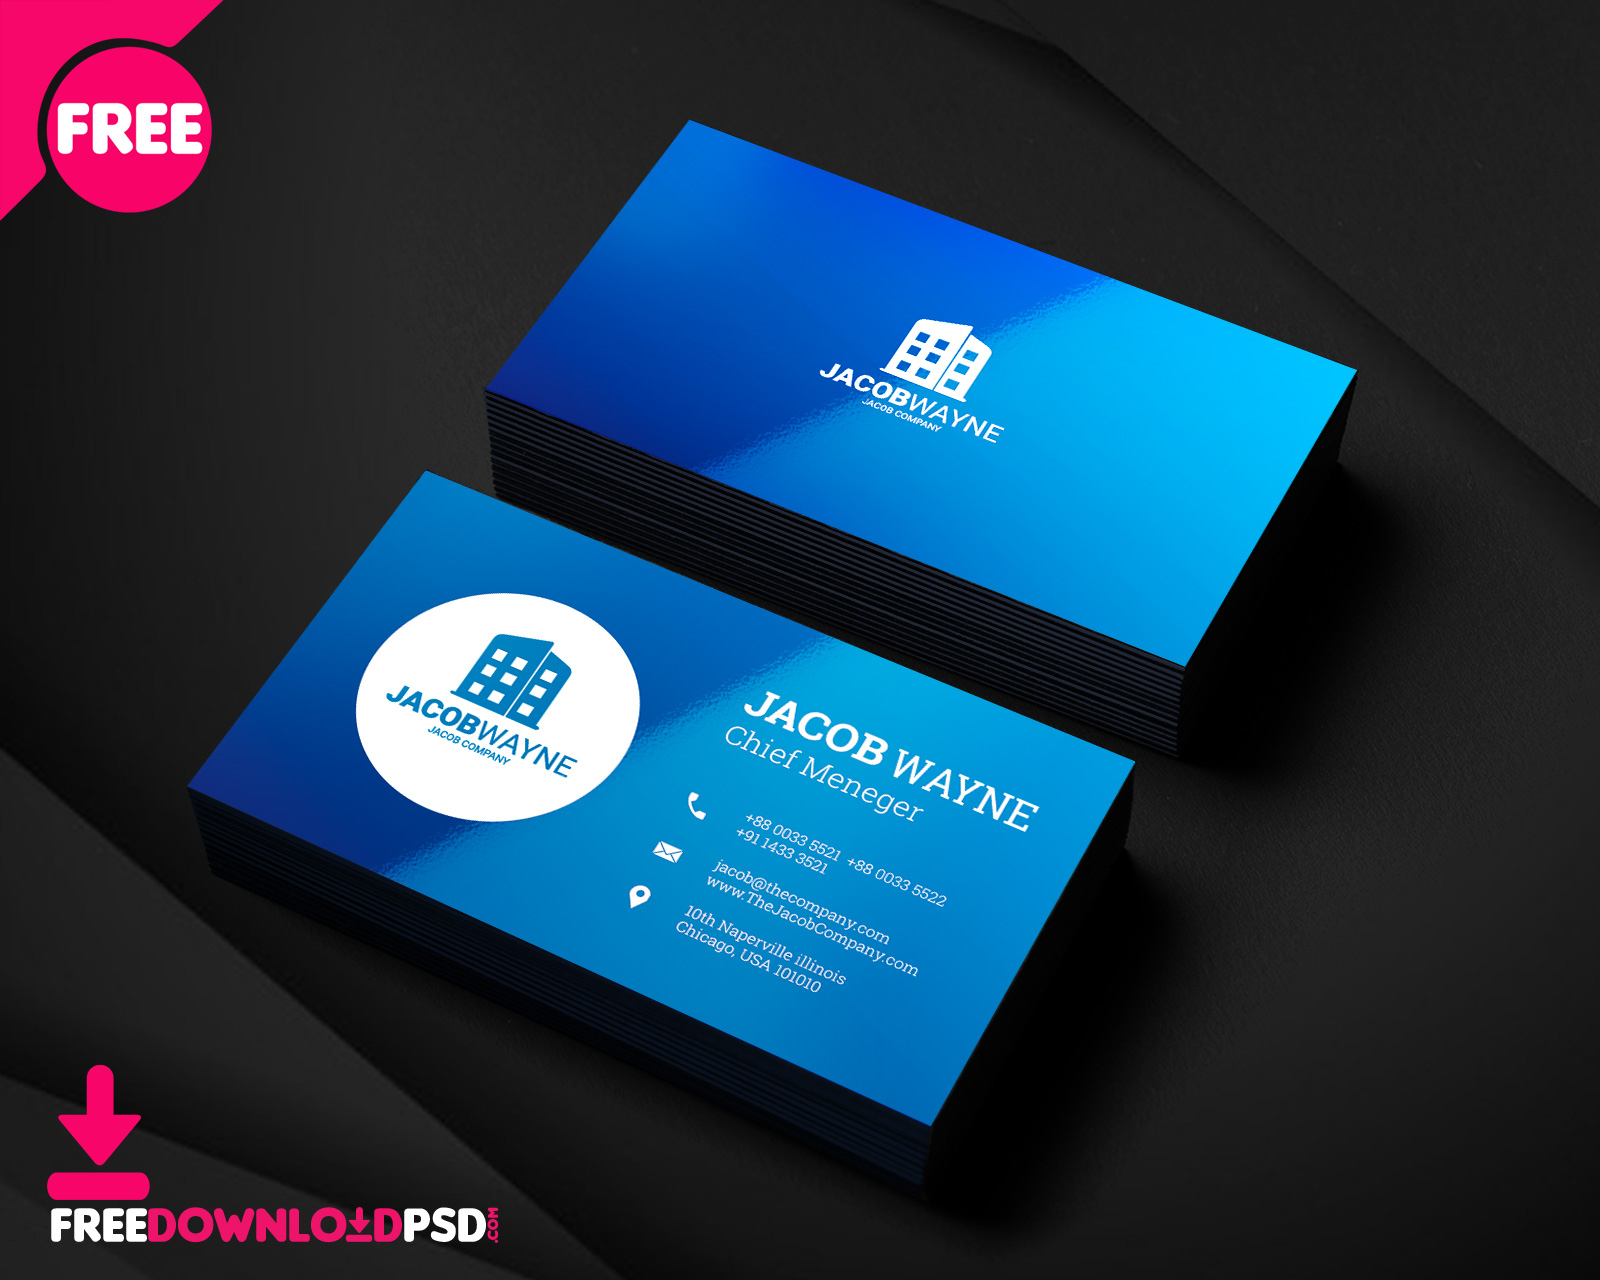 Real Estate Business Card Psd | Freedownloadpsd Inside Photoshop Cs6 Business Card Template